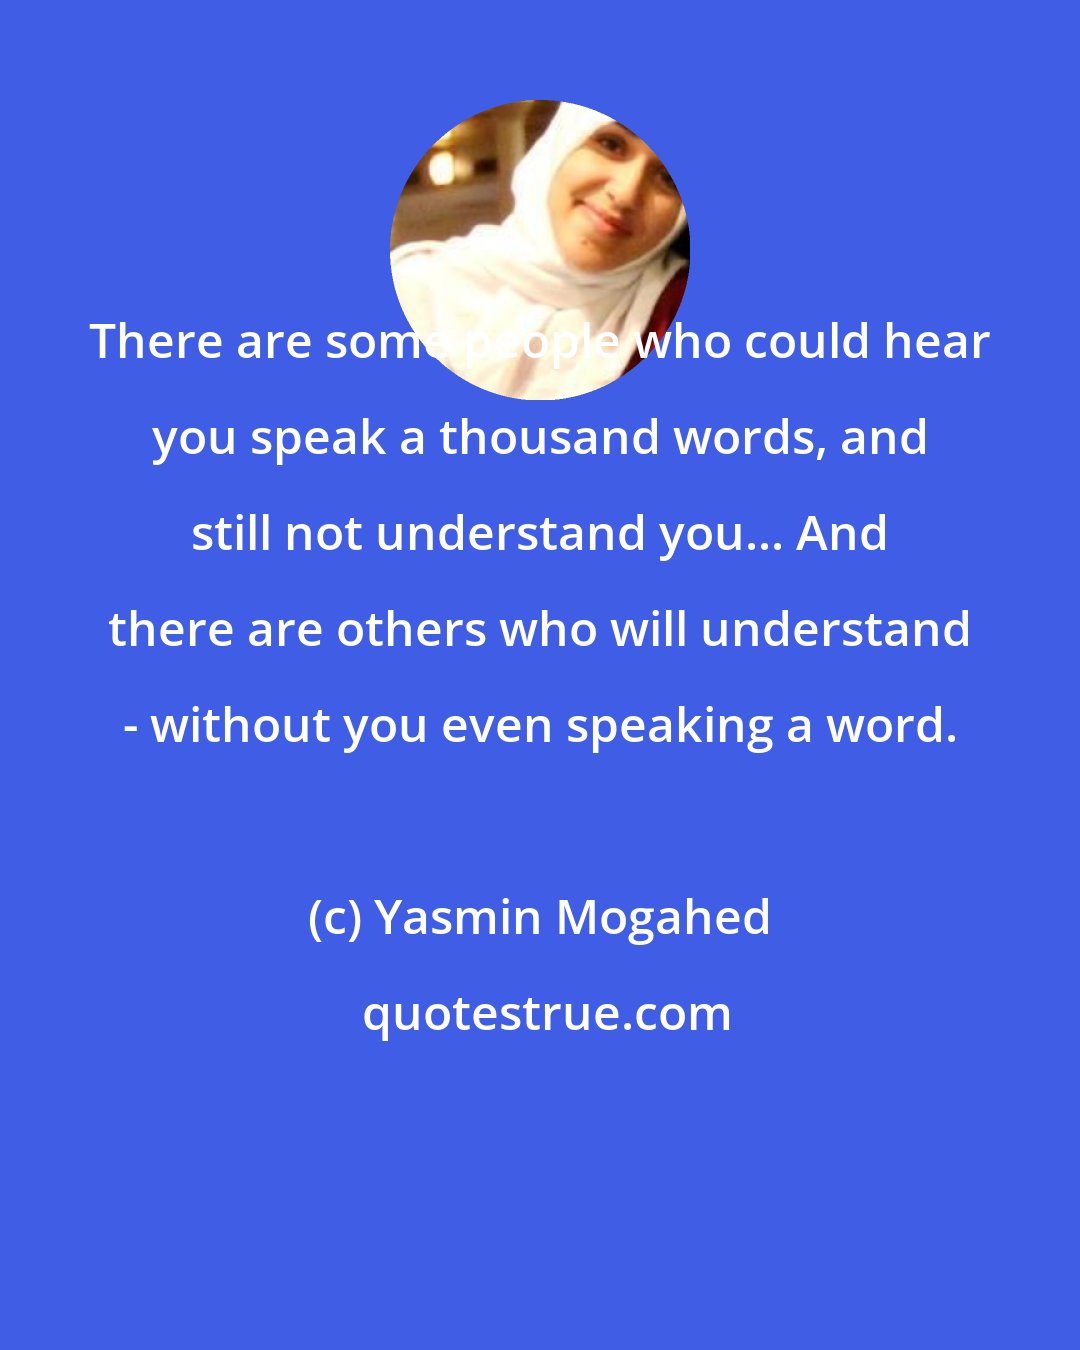 Yasmin Mogahed: There are some people who could hear you speak a thousand words, and still not understand you... And there are others who will understand - without you even speaking a word.